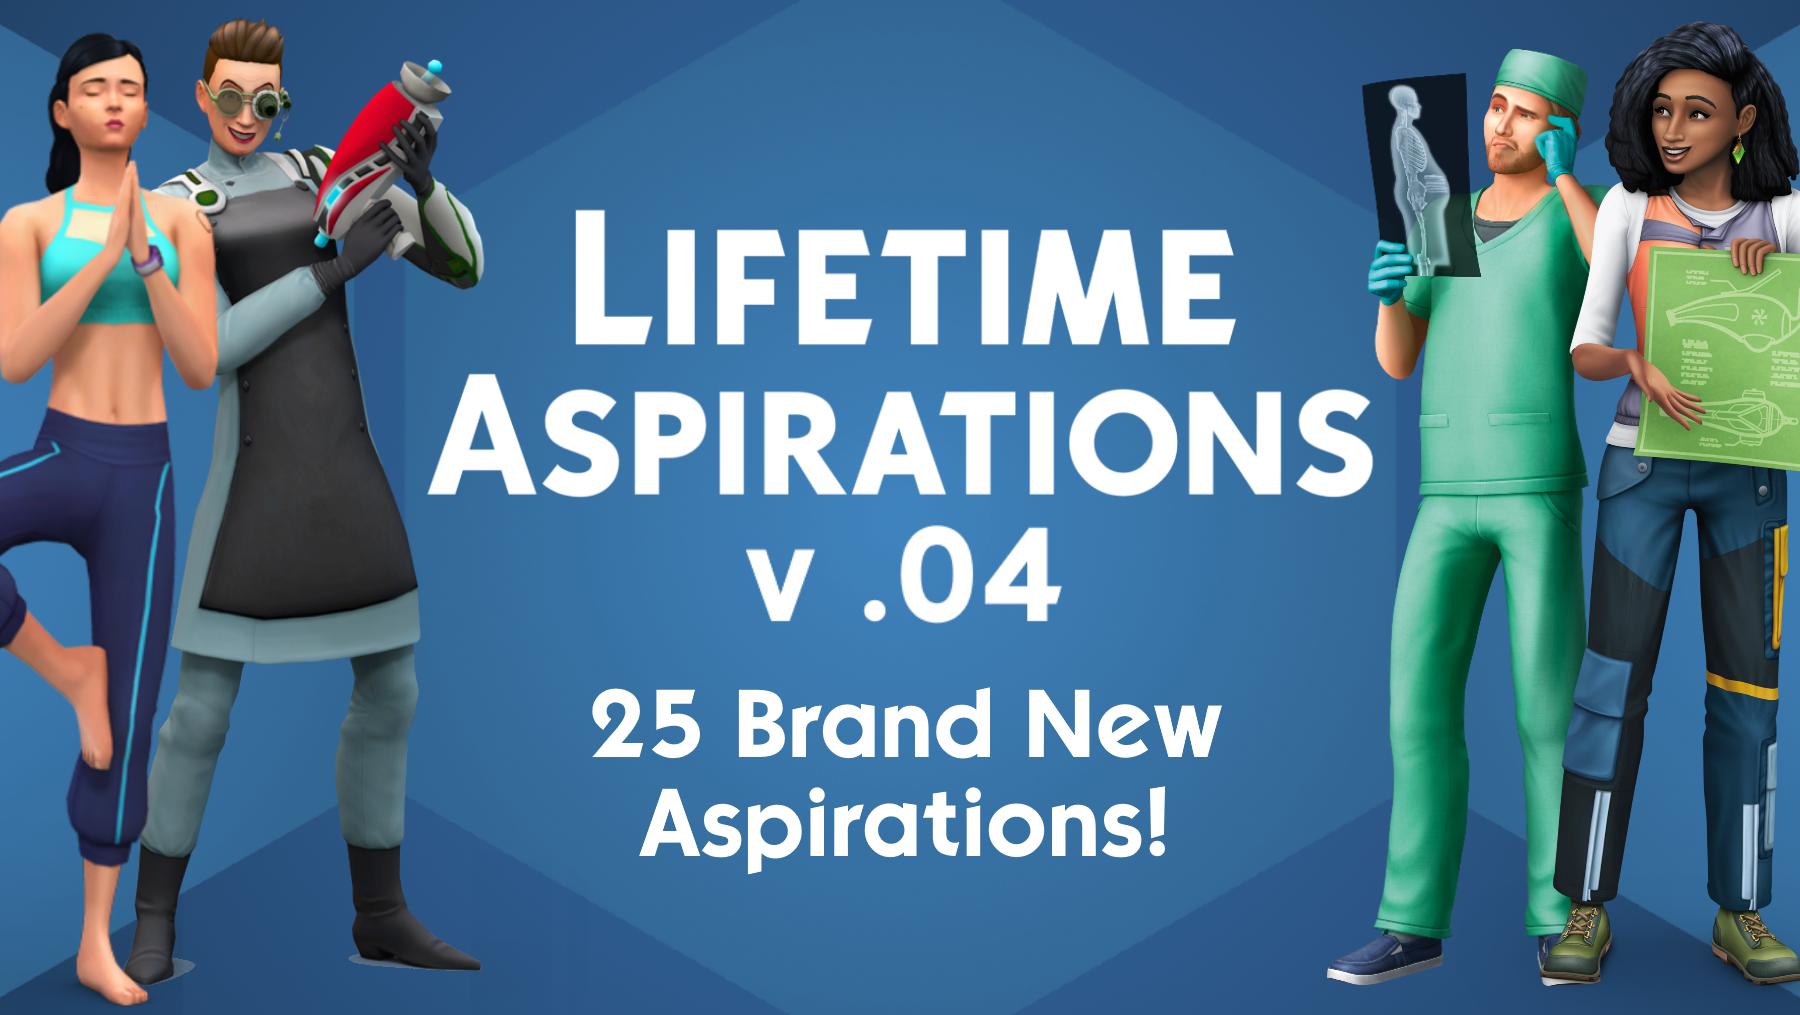 36+ Super Fun Sims 4 Custom Aspirations You Need in Your Game (Sims 4